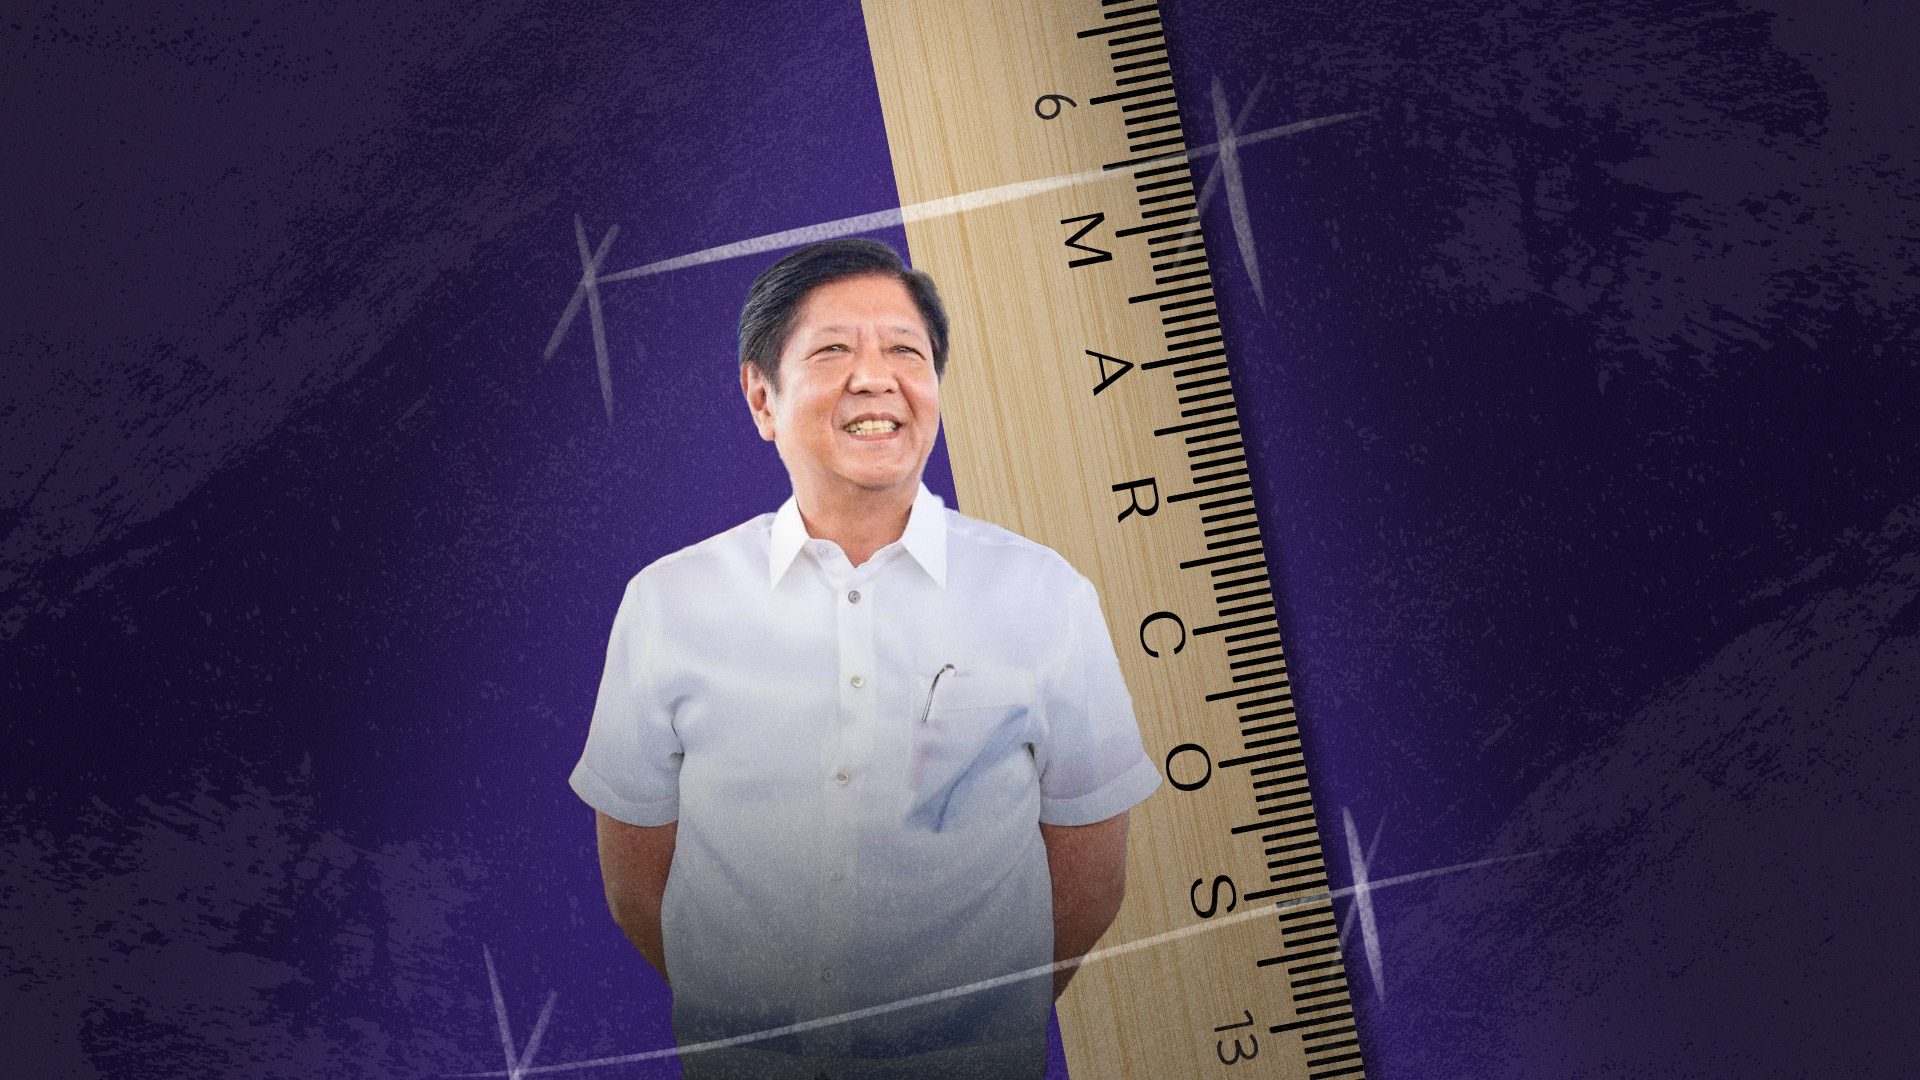 [ANALYSIS] SONA 2023: How to judge PBBM by his own standards